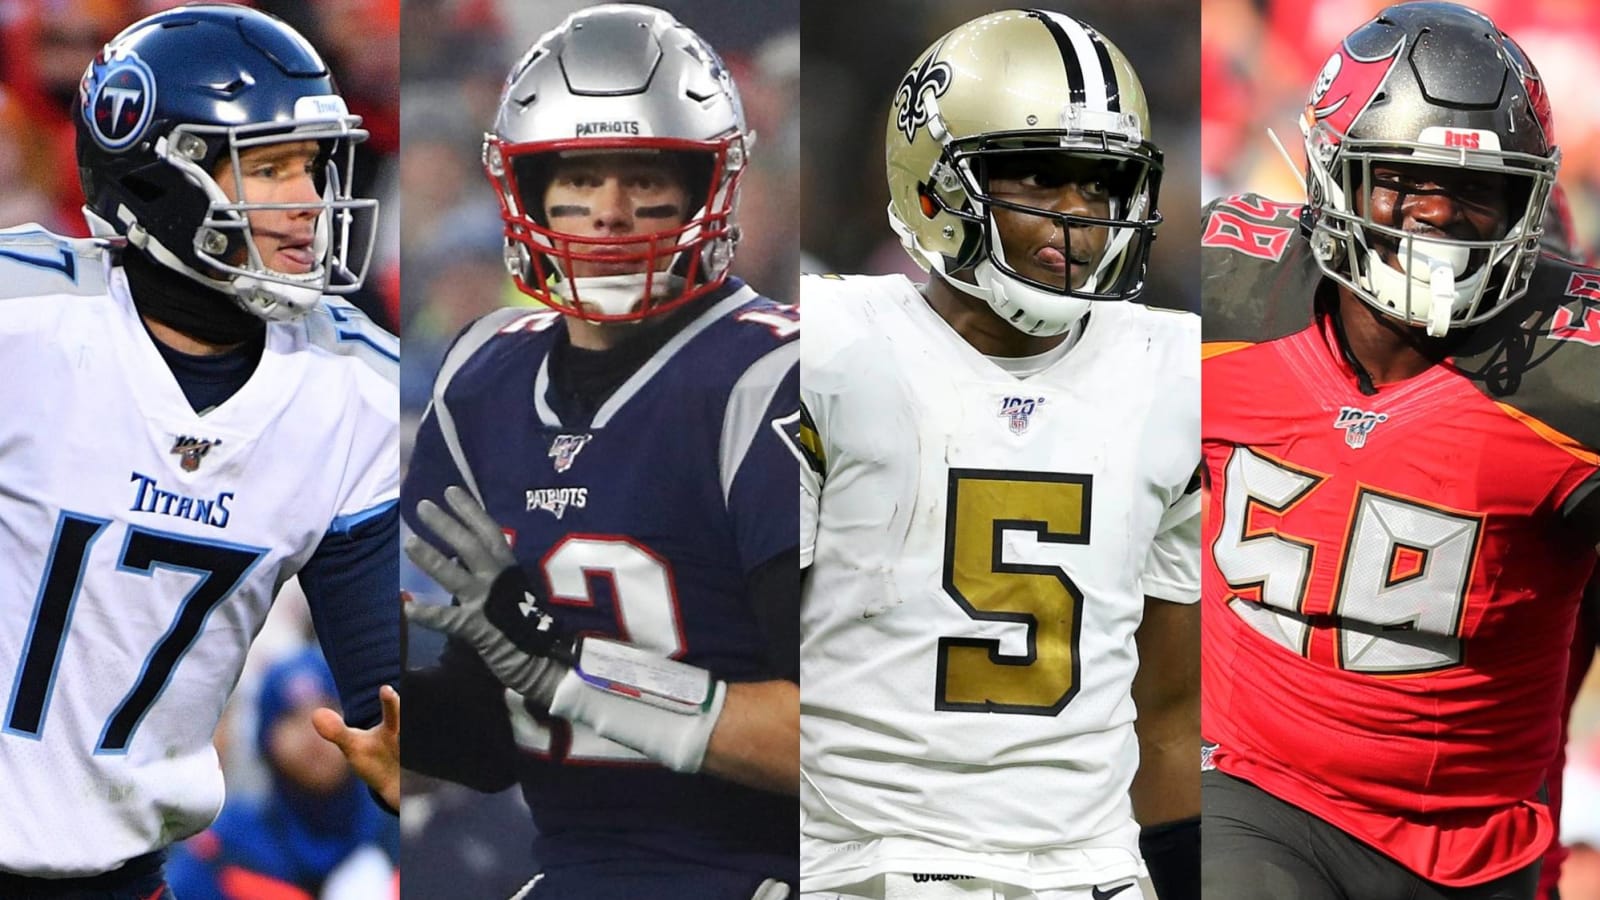 Buyer beware: 15 NFL free agents who may not be worth huge payday